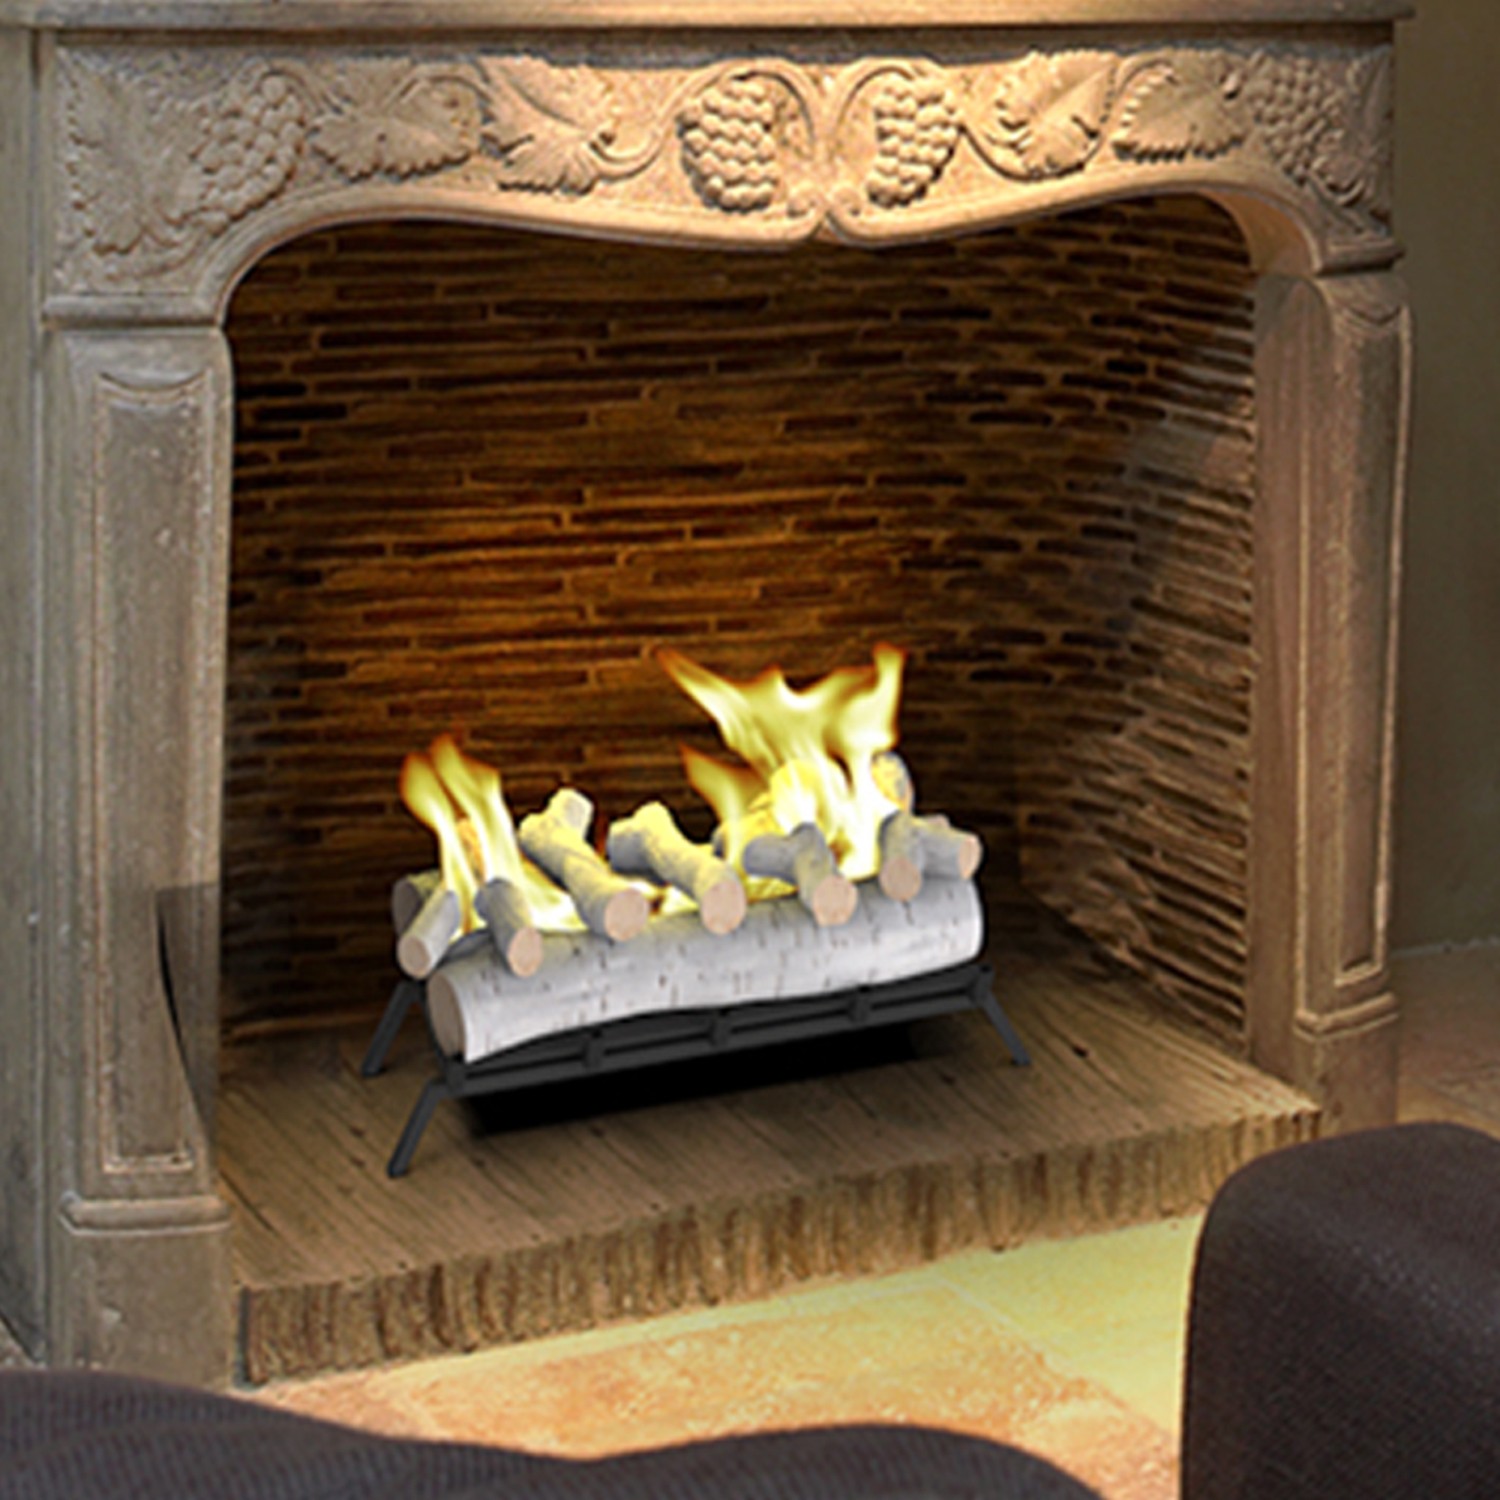 Regal Flame 24 Inch Convert to Ethanol Fireplace Log Set with Burner Insert from Gel or Gas Logs (Oak)